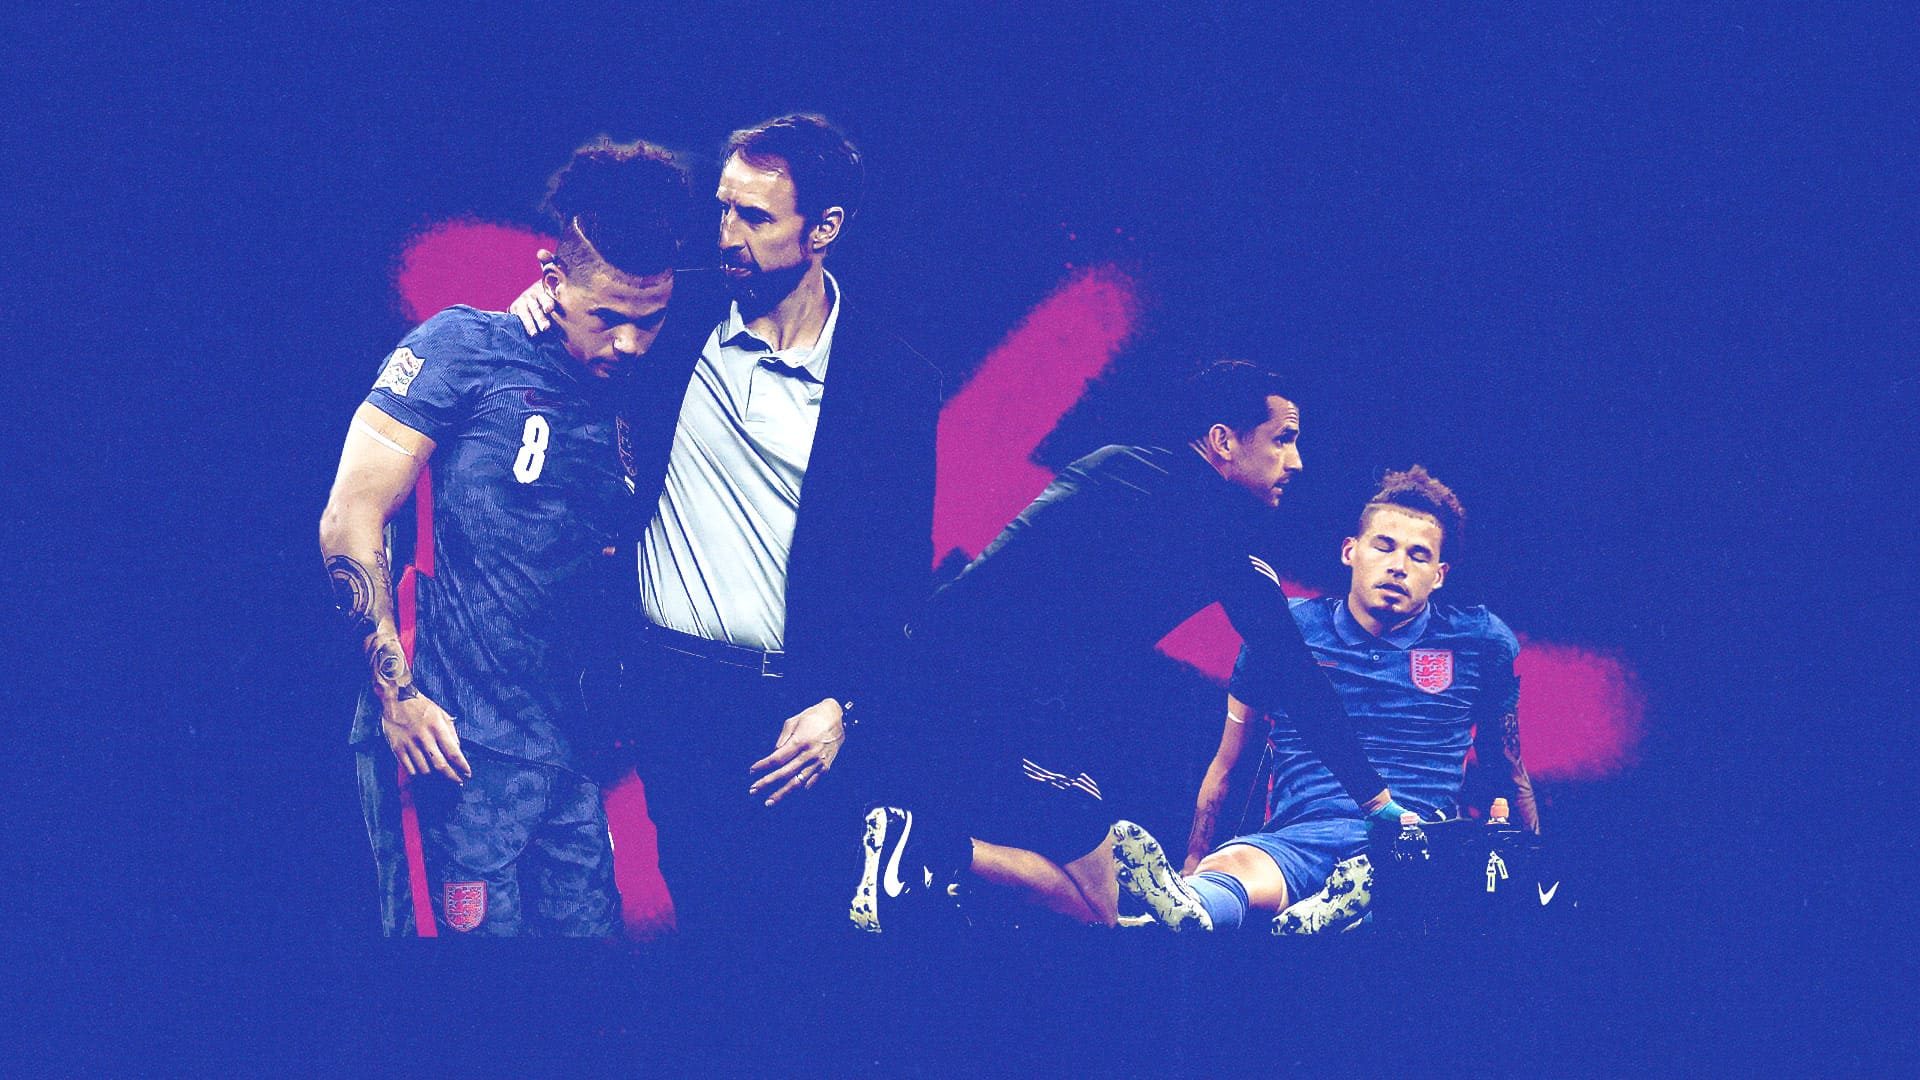 A collage of Gareth Southgate with his arm around our Kalvin, next to our Kalvin getting treatment during England vs Germany